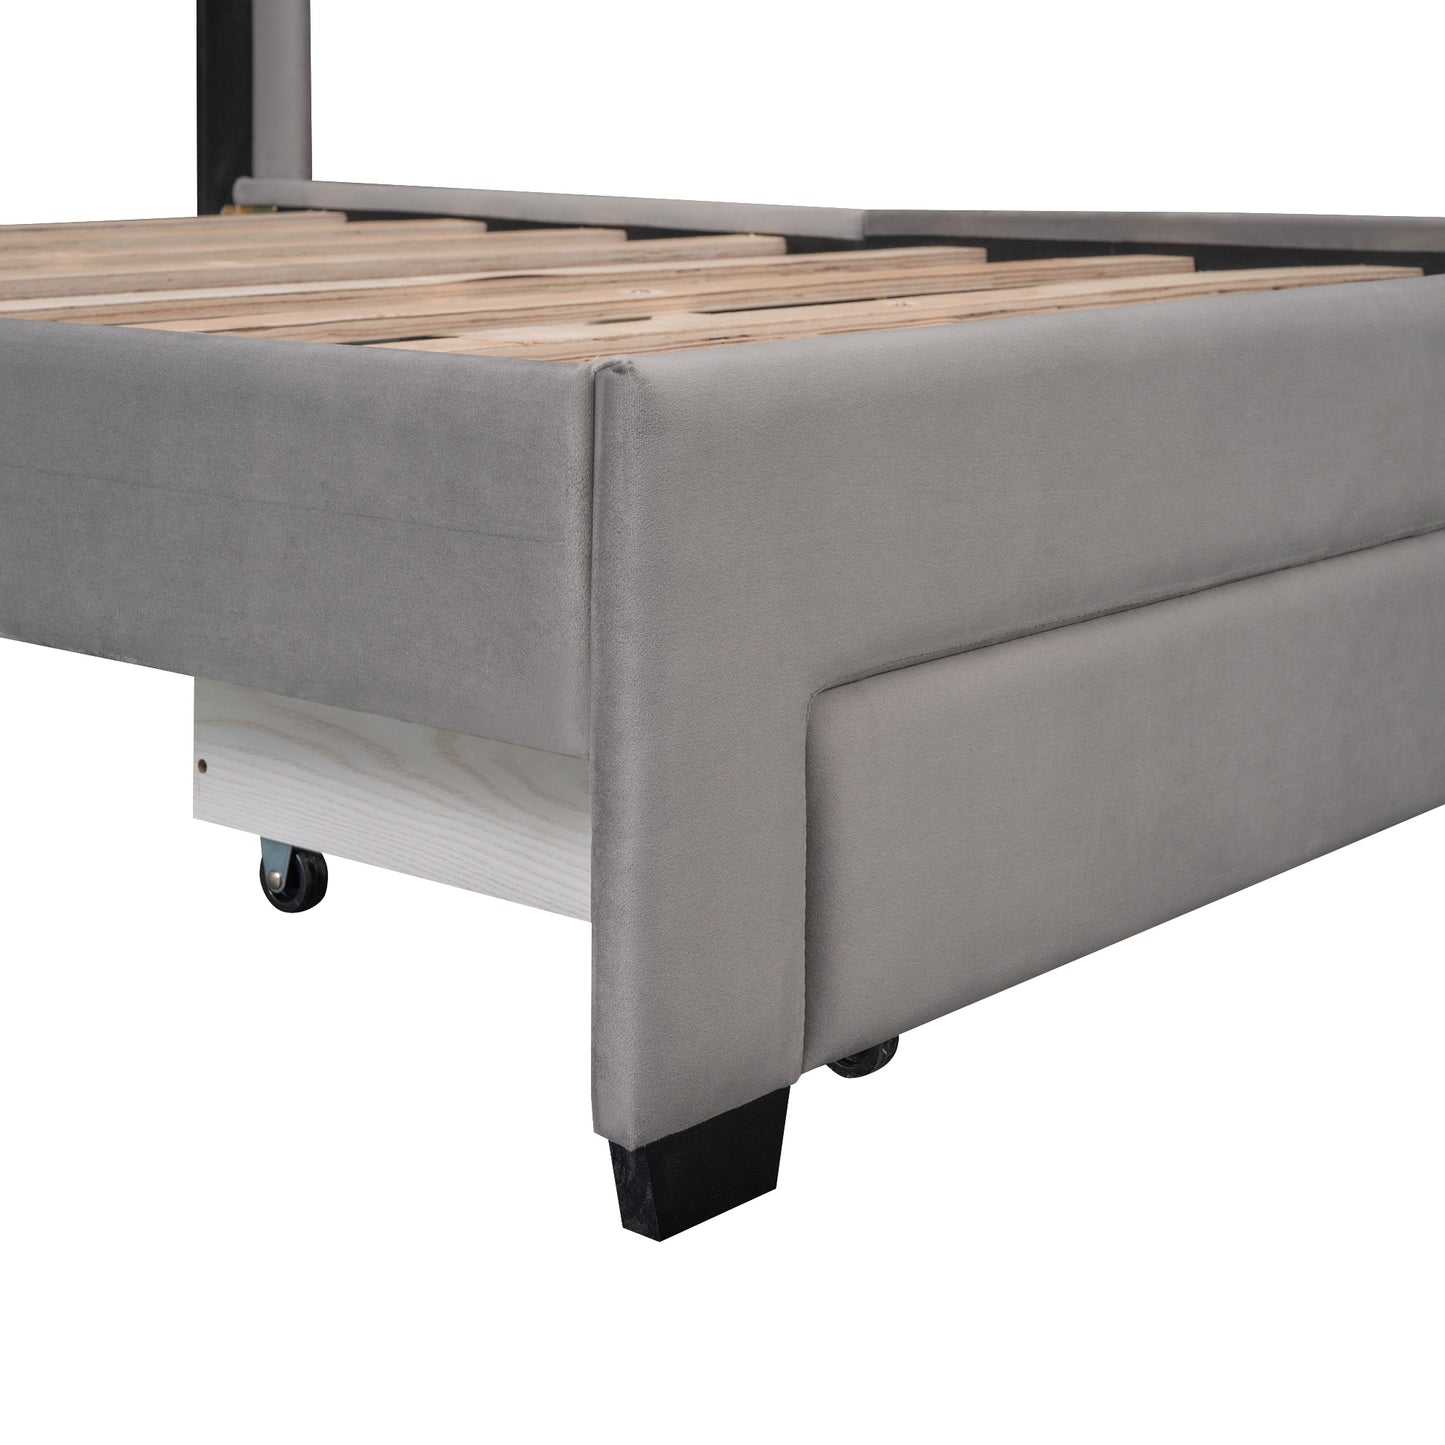 Lined Storage Queen Bed